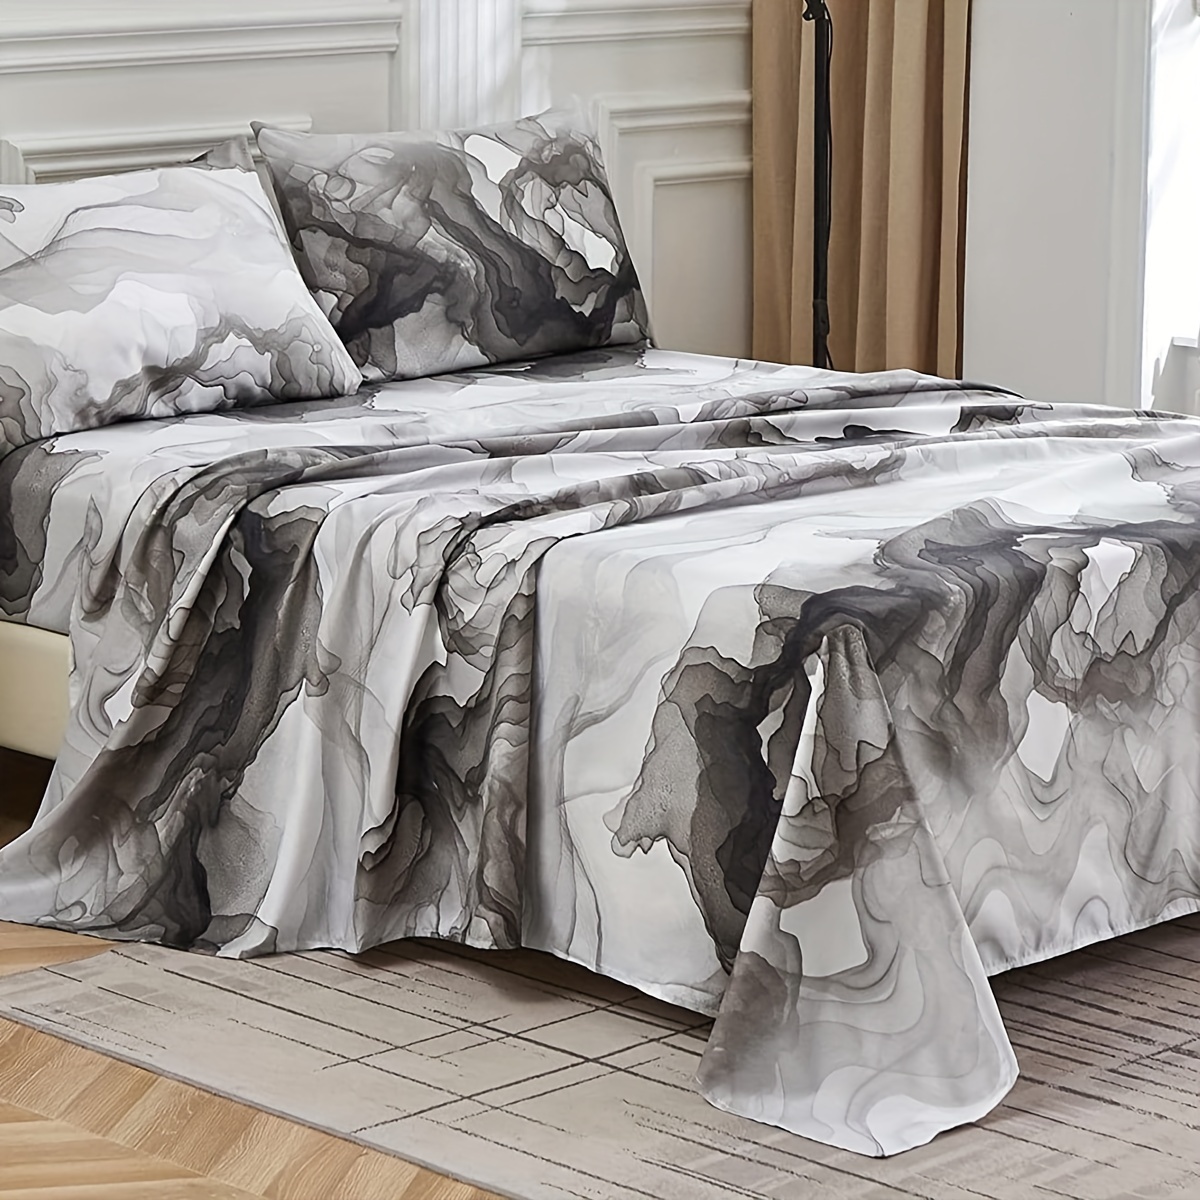 4pcs soft and breathable ink fluid painting bedding set for bedroom guest room hotel and dorm includes 1 flat sheet 1 fitted sheet and 2 pillowcases core free